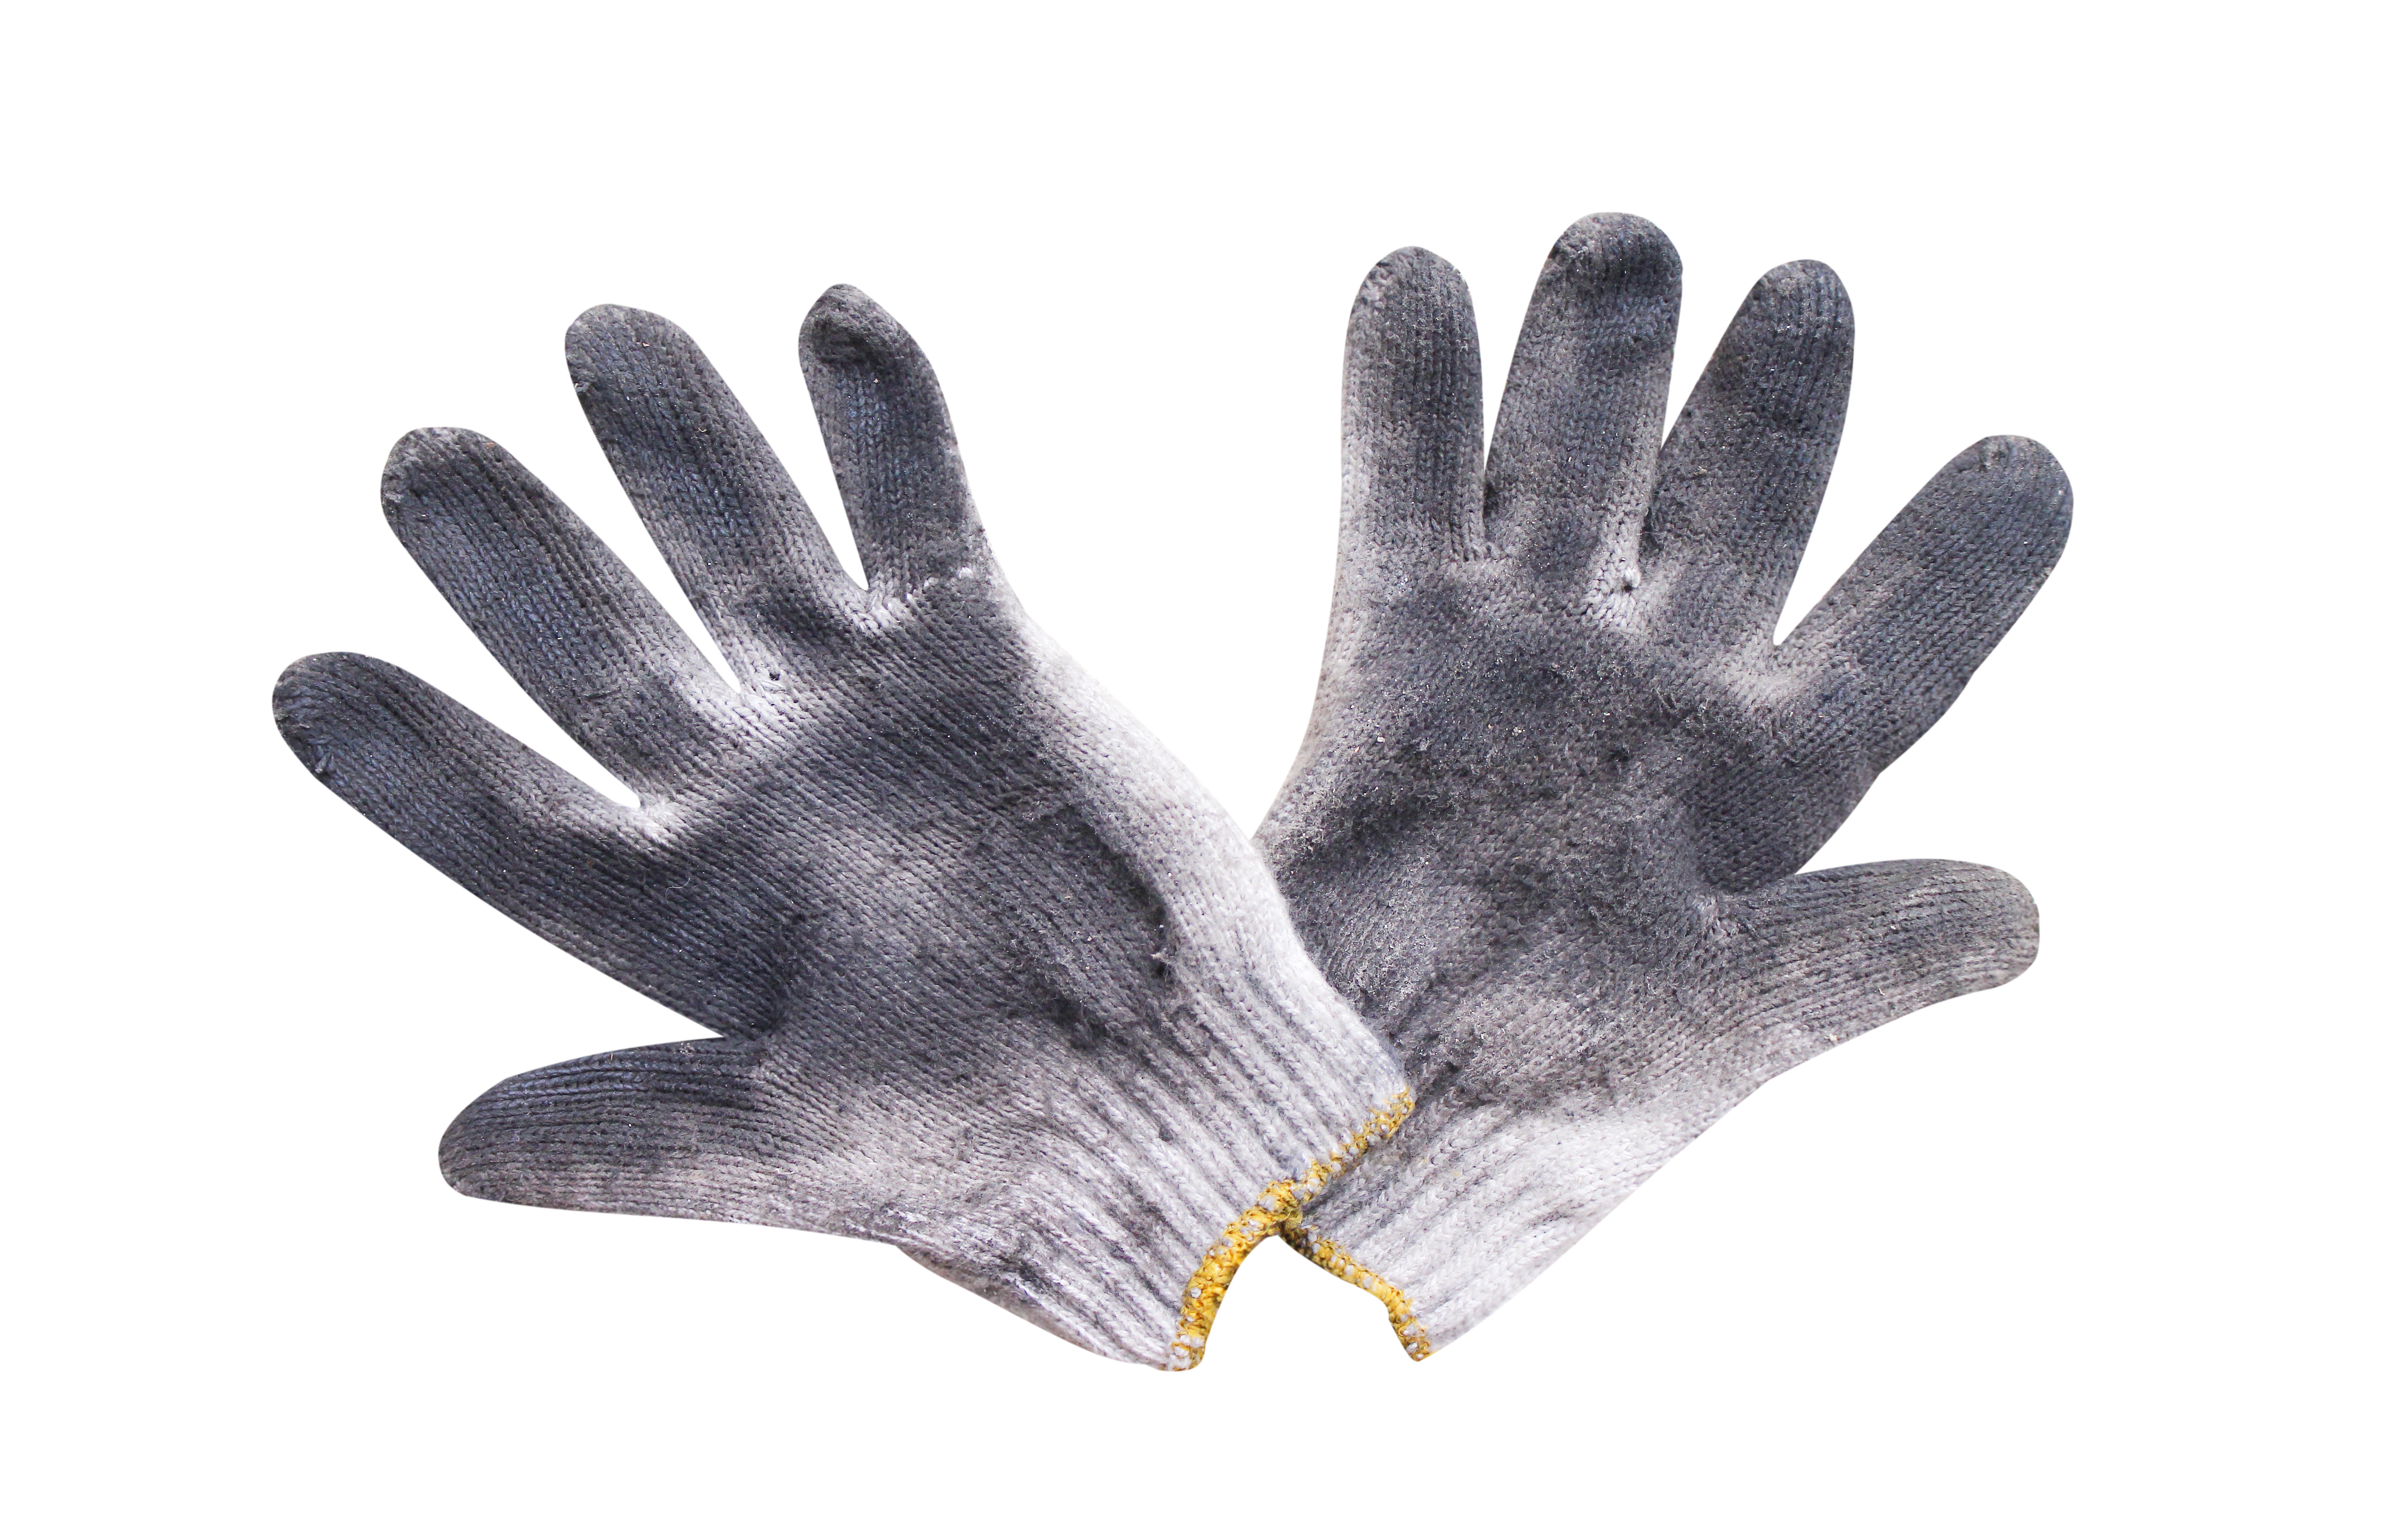 Learn How to Clean and Take Care of Work Gloves 